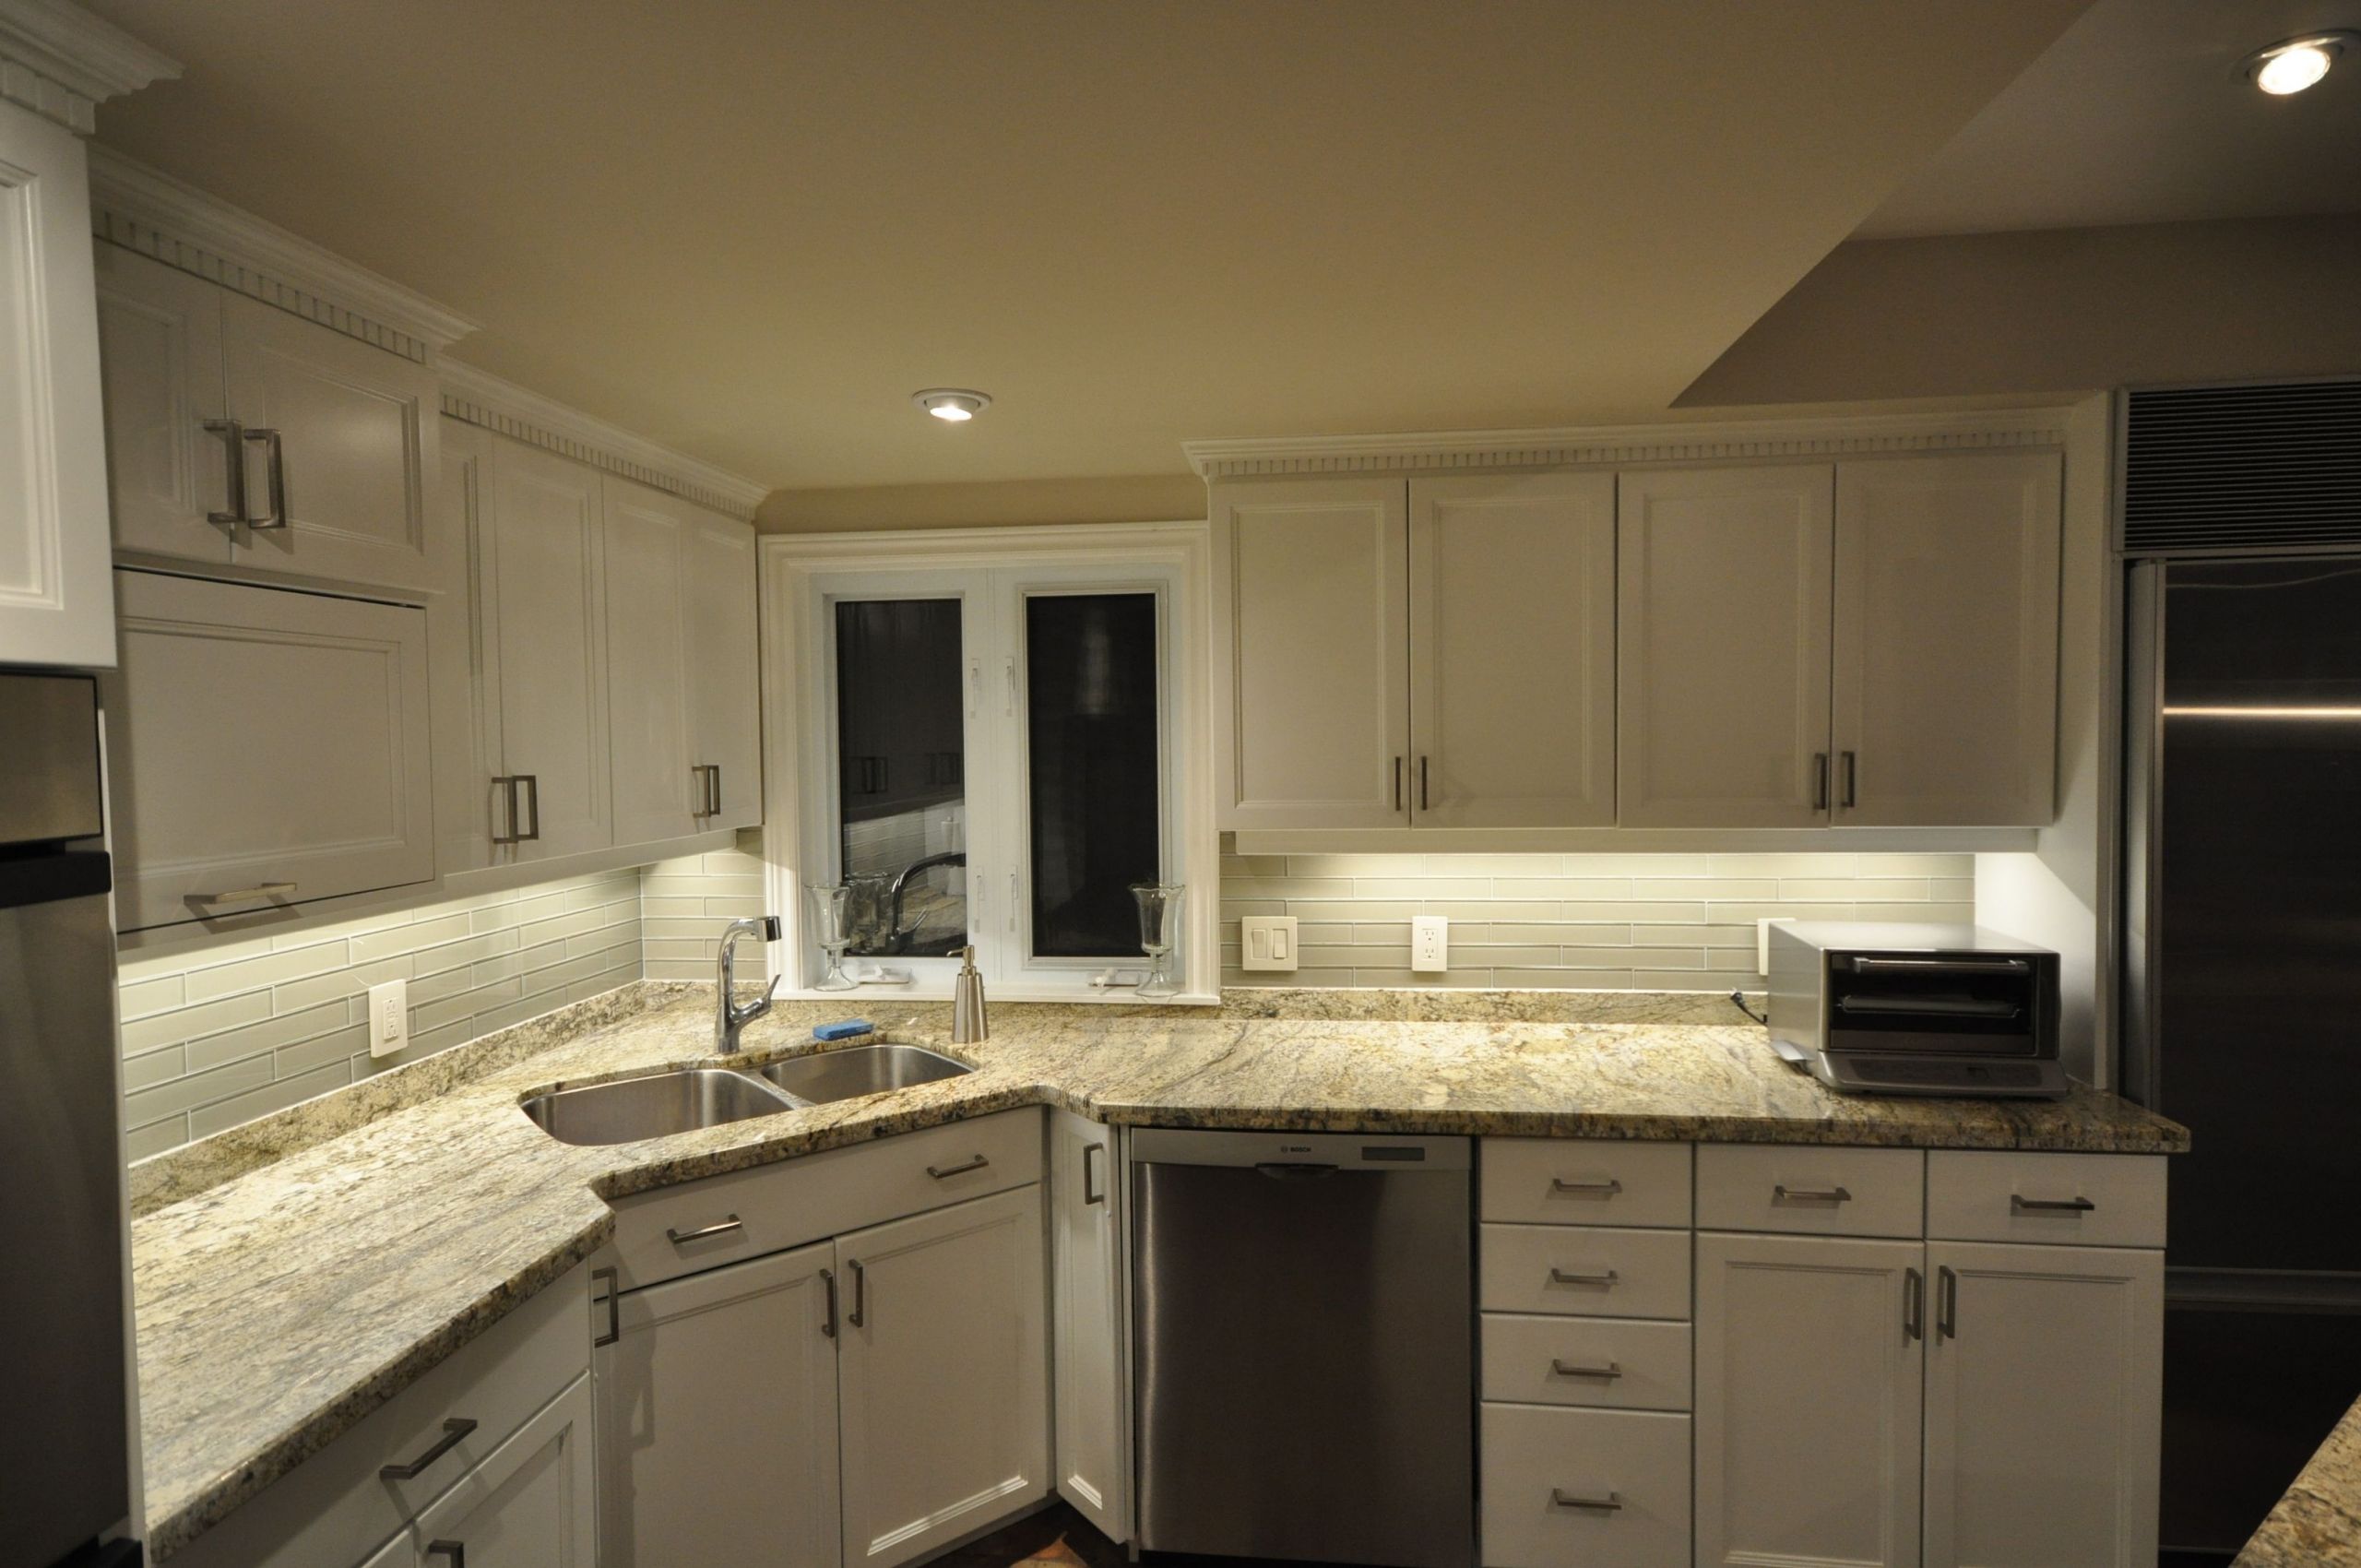 Led Under Cabinet Kitchen Lights
 Pin on Under cabinet lighting projects